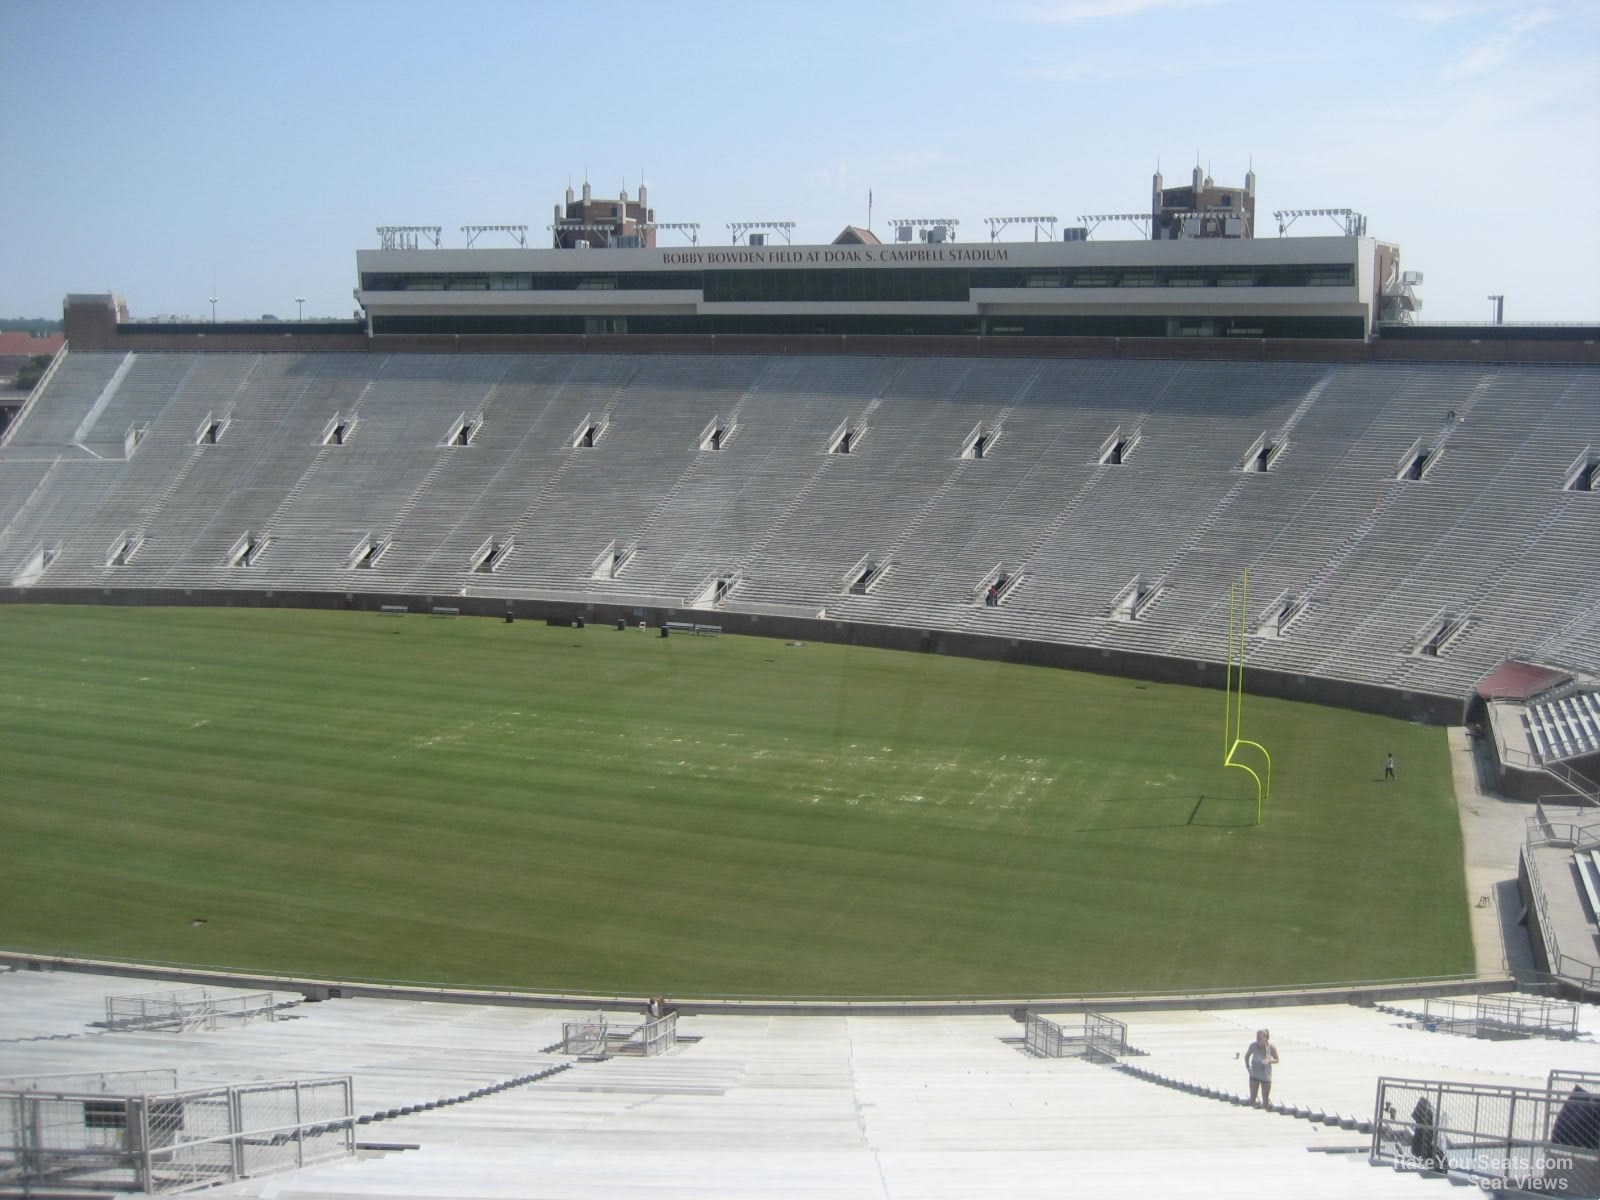 section 29, row 77 seat view  - doak campbell stadium